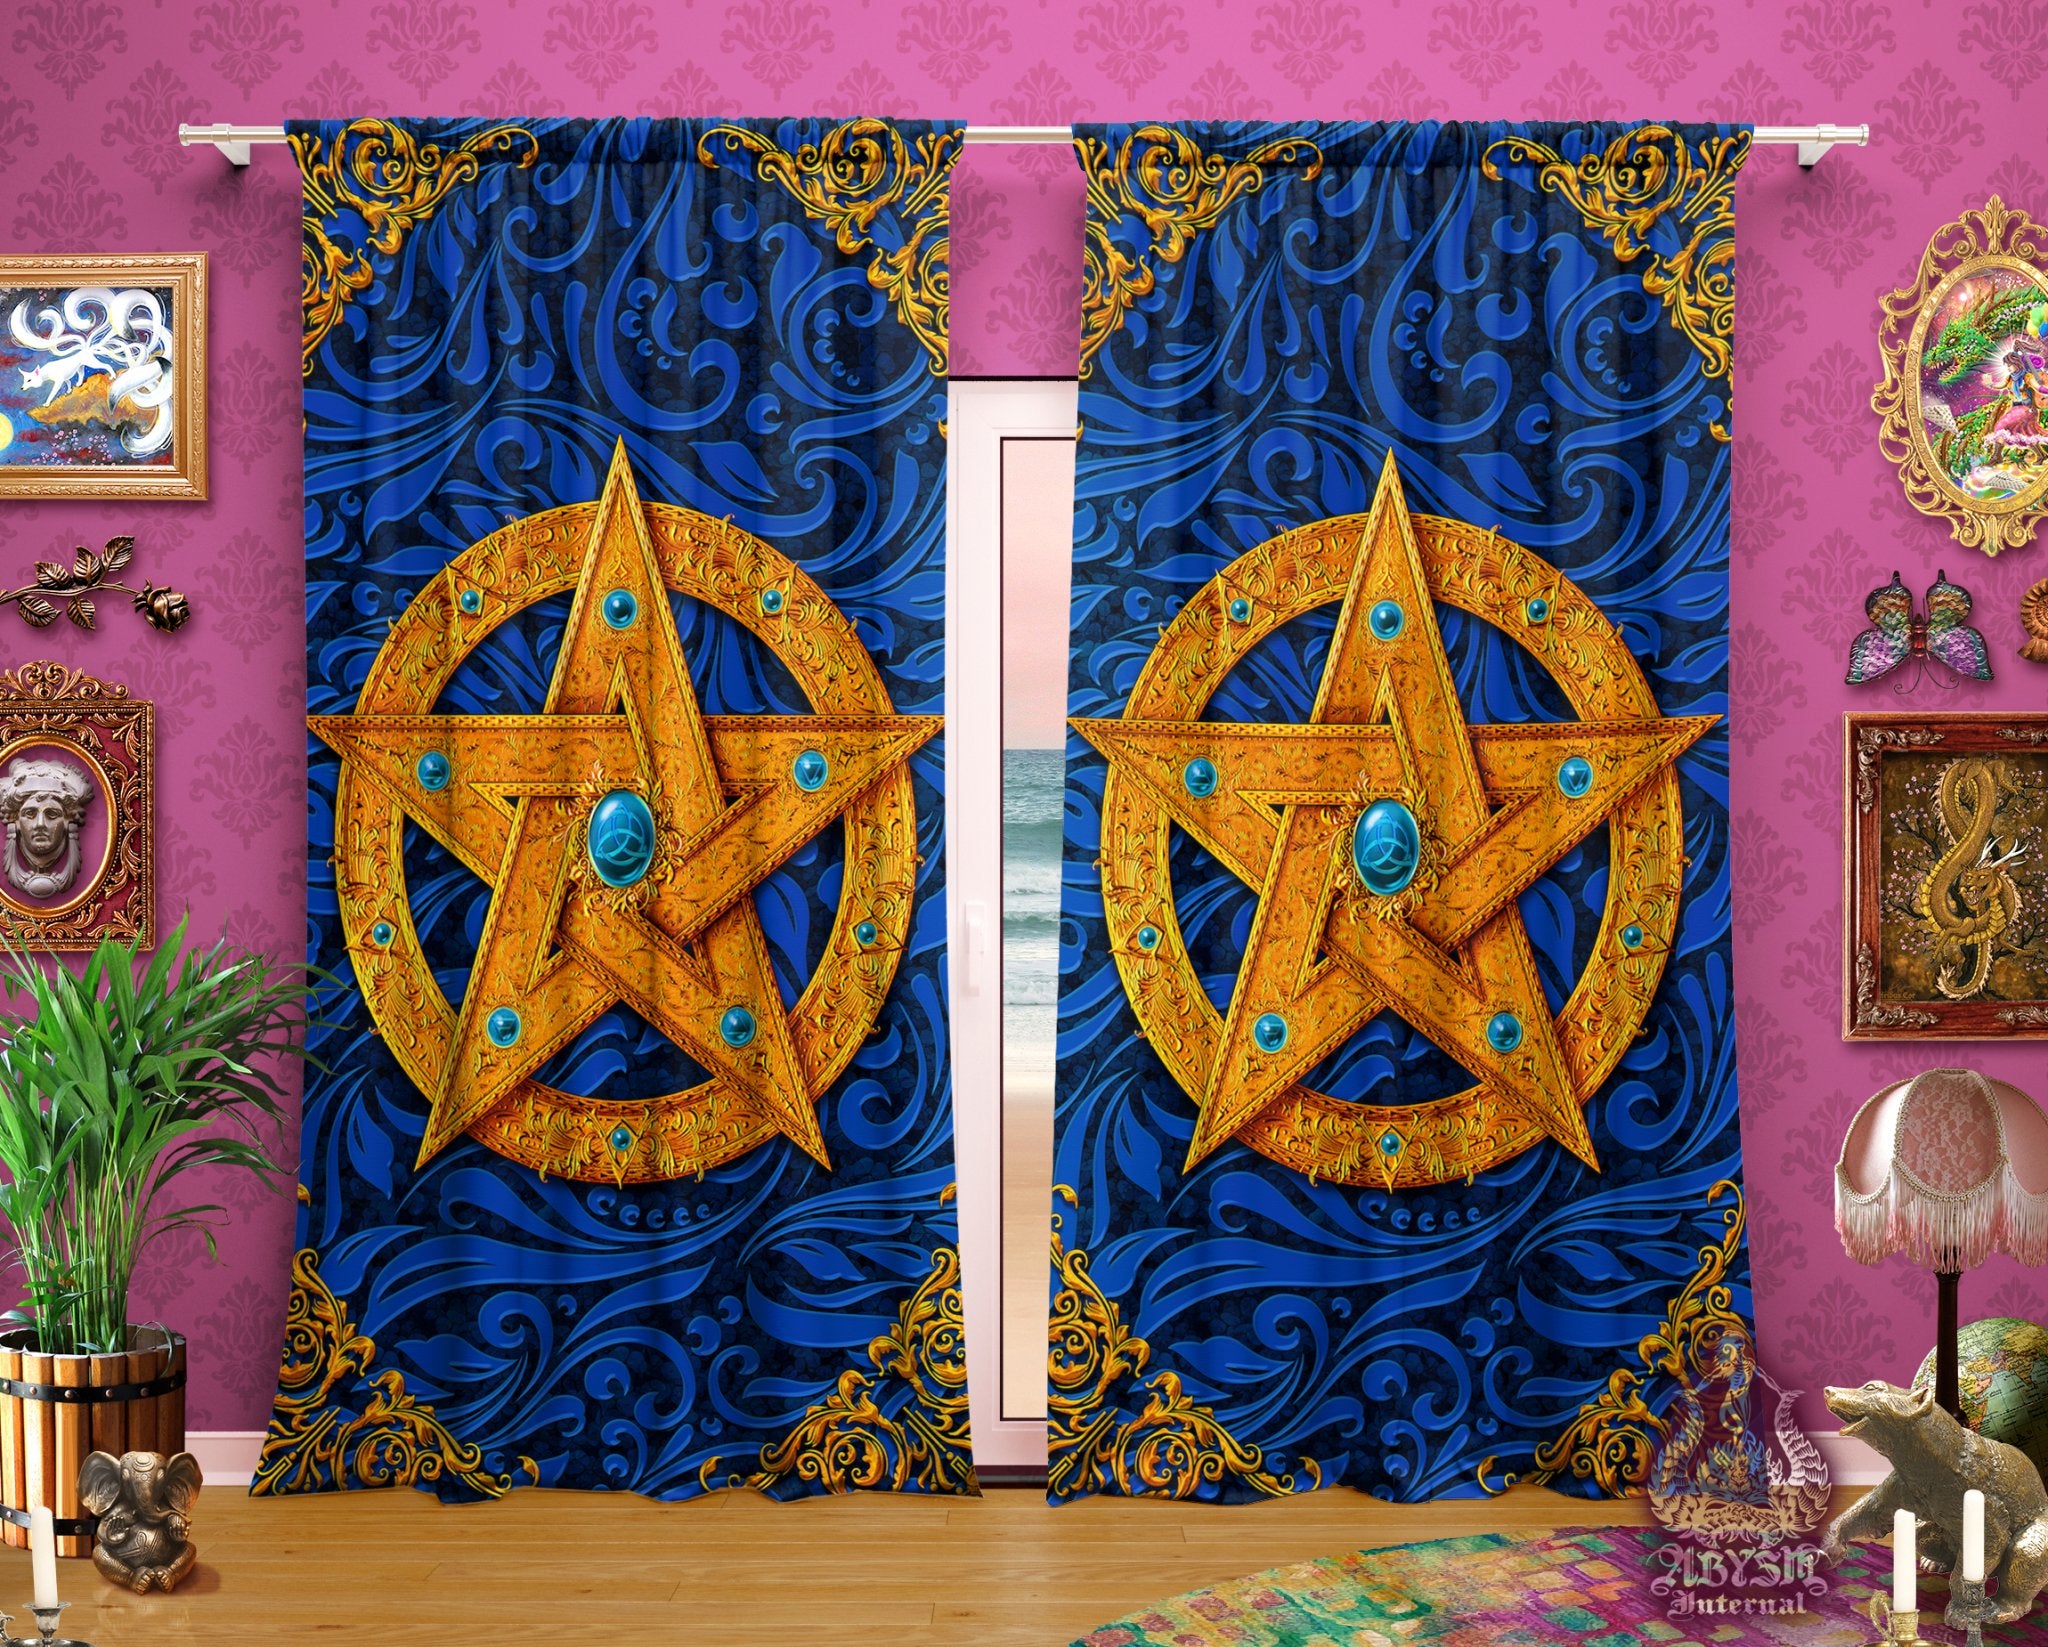 Wiccan Curtains, 50x84' Printed Window Panels, Pentacle, Pagan Room Decor, Art Print, Funky and Eclectic Home Decor - Purple, Green, Blue and Red, 4 Colors - Abysm Internal